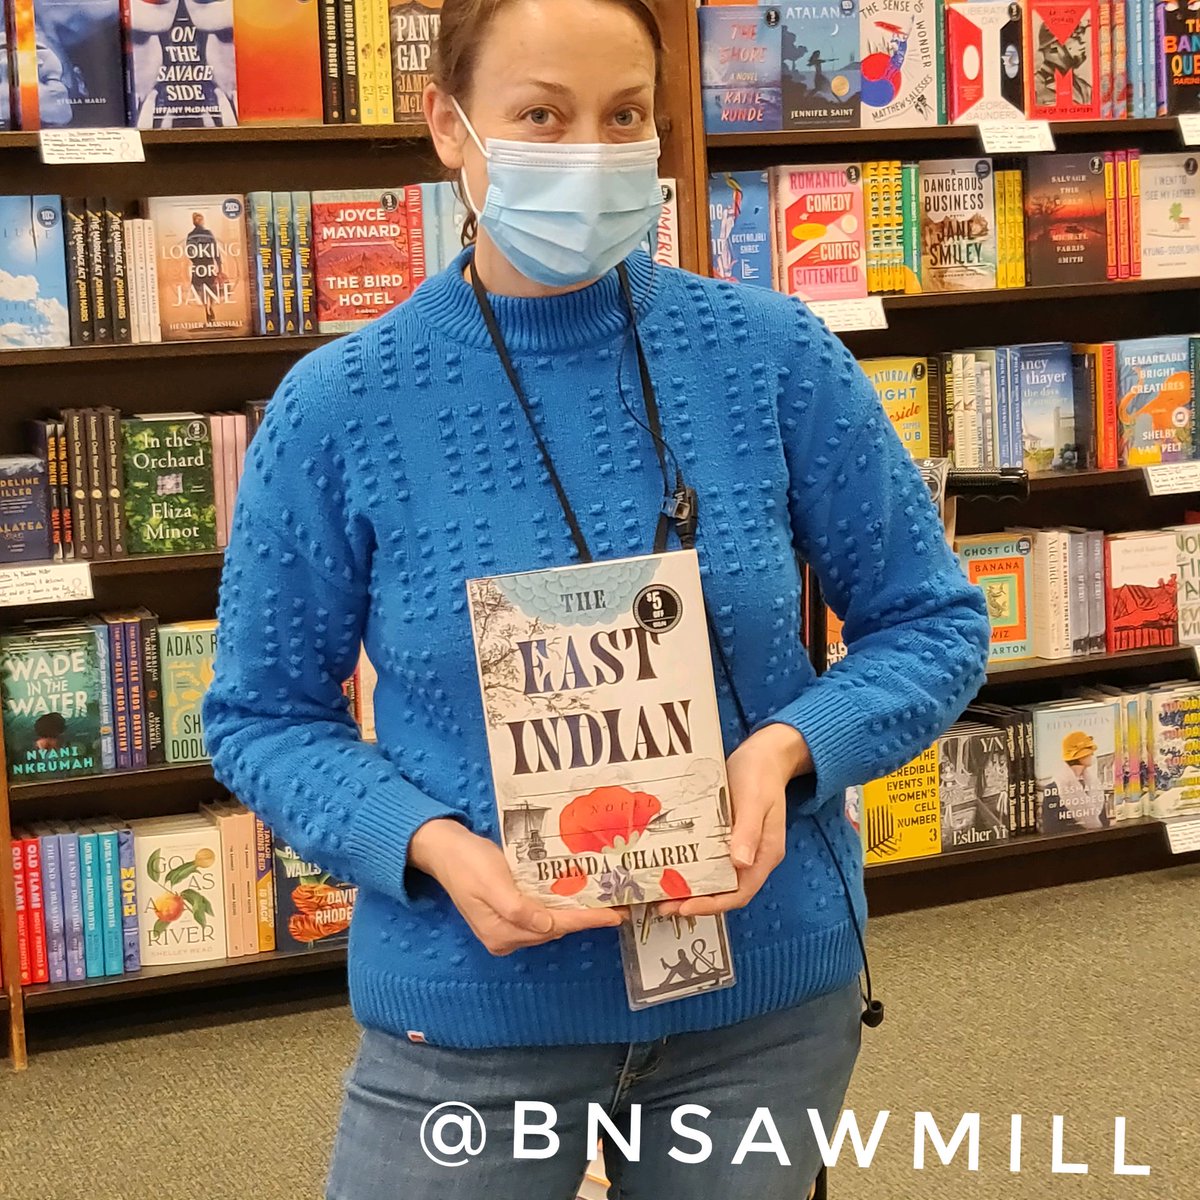 Inspired by a historical figure, The East Indian is the newest Discover pick!

#theeastindian #bndiscoverpick #bnsawmill #discoverpick #historicalfiction #fiction #newbooks #newhardcovers